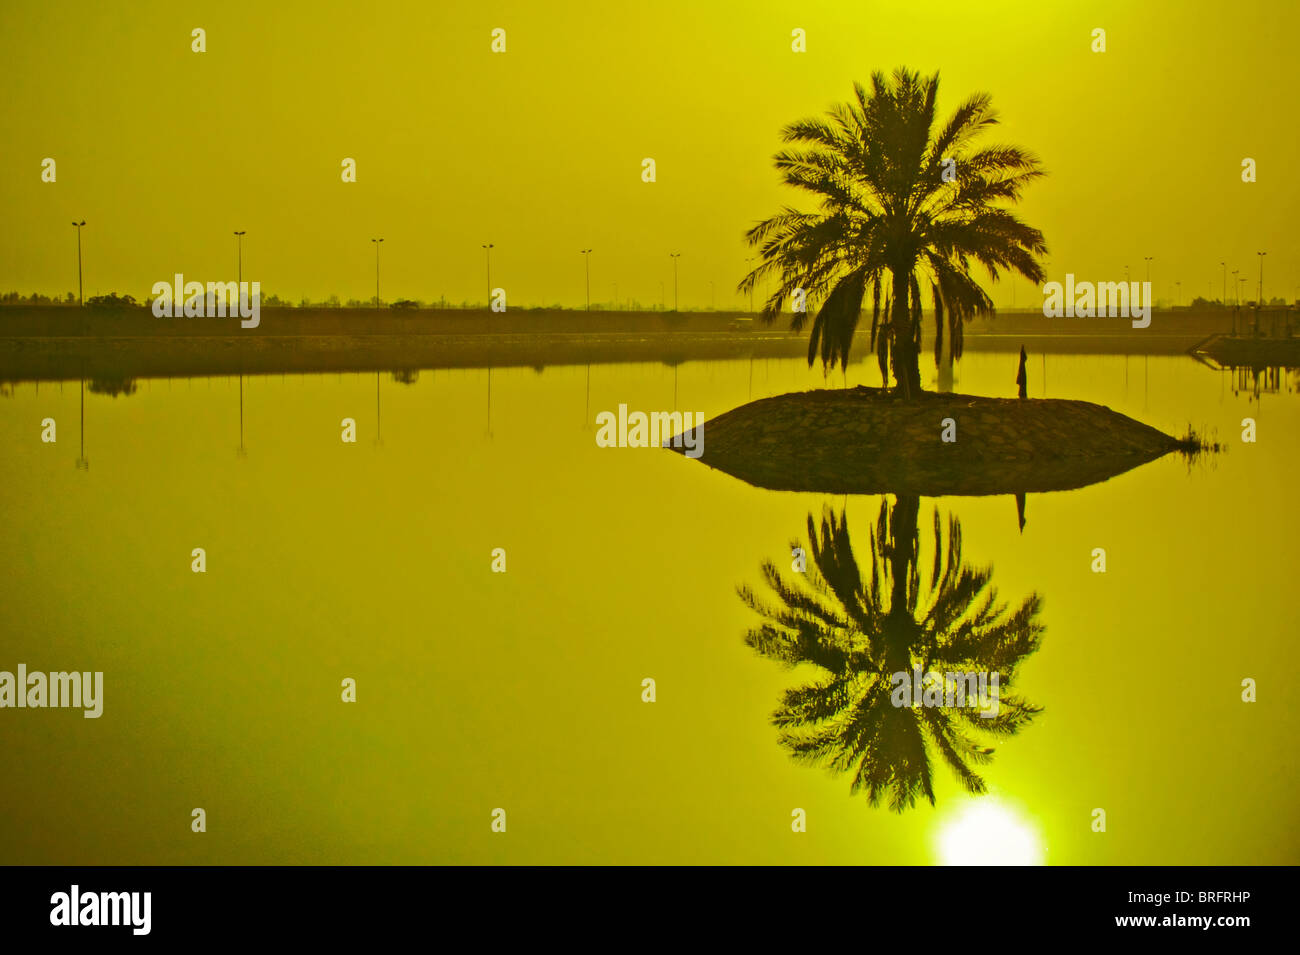 A Palm tree in the Middle East standing before a small body of water. A man made lake in Baghdad, Iraq near Saddam's Palace. Stock Photo